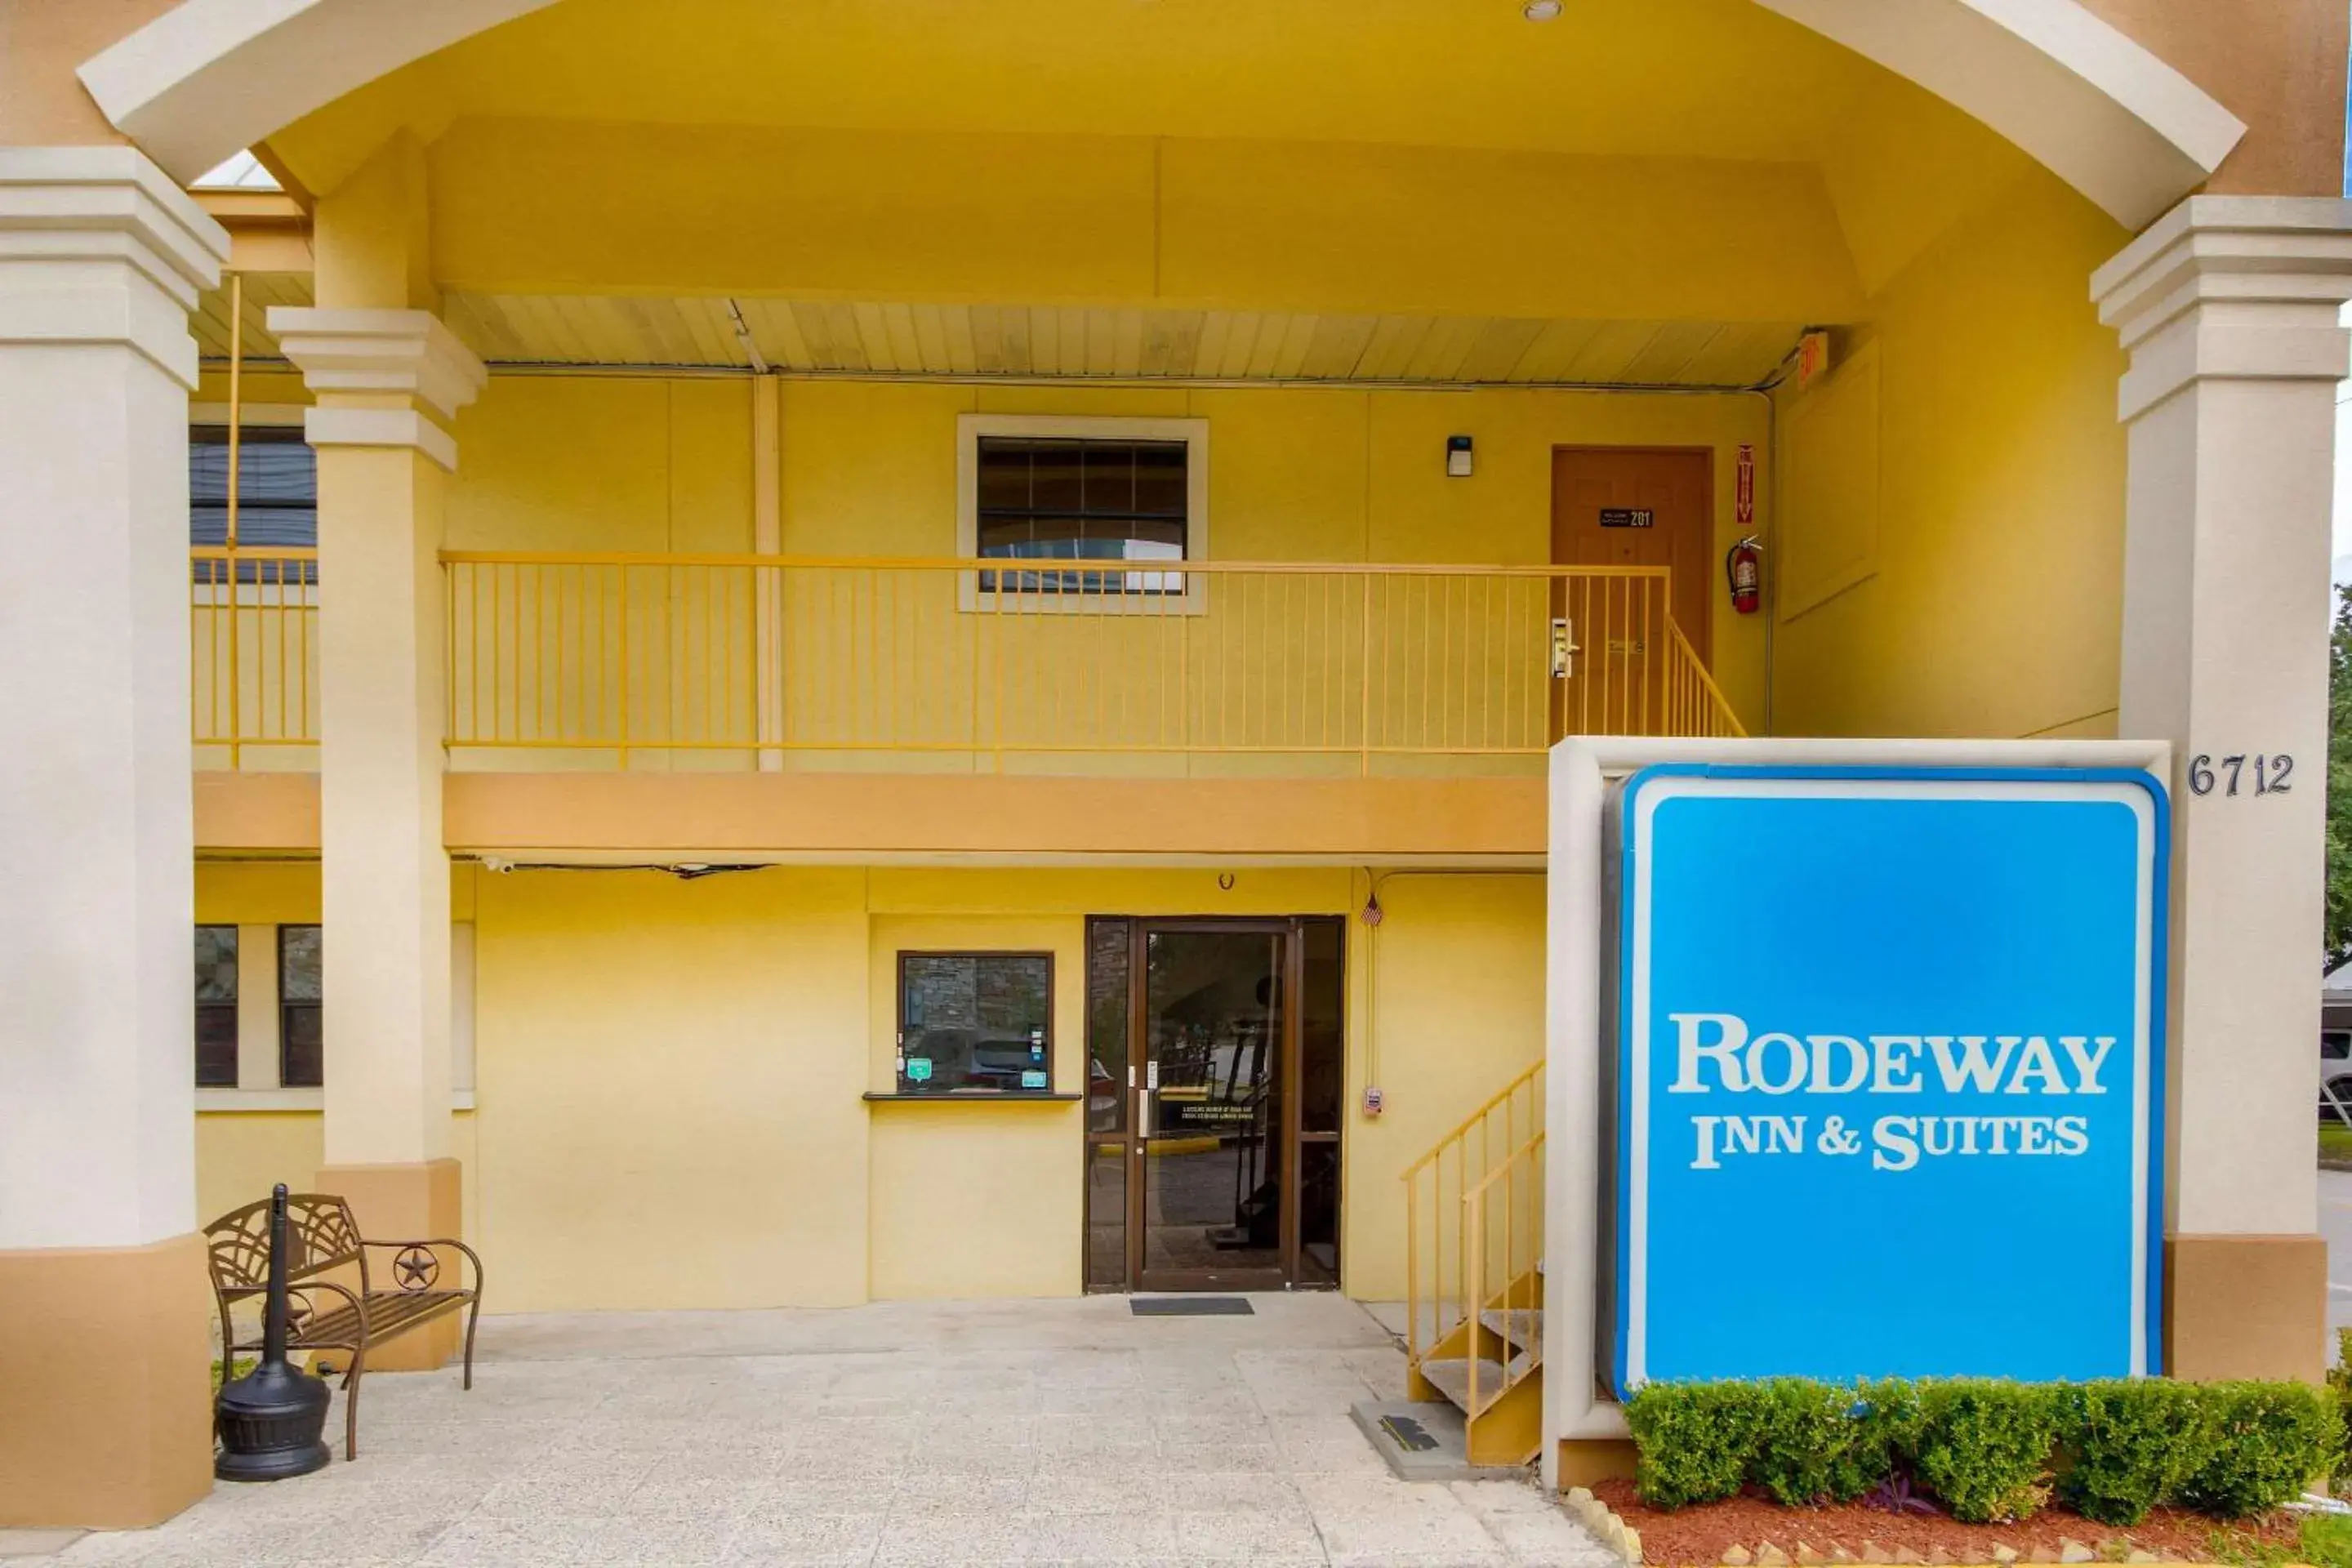 Property building in Rodeway Inn & Suites Houston near Medical Center